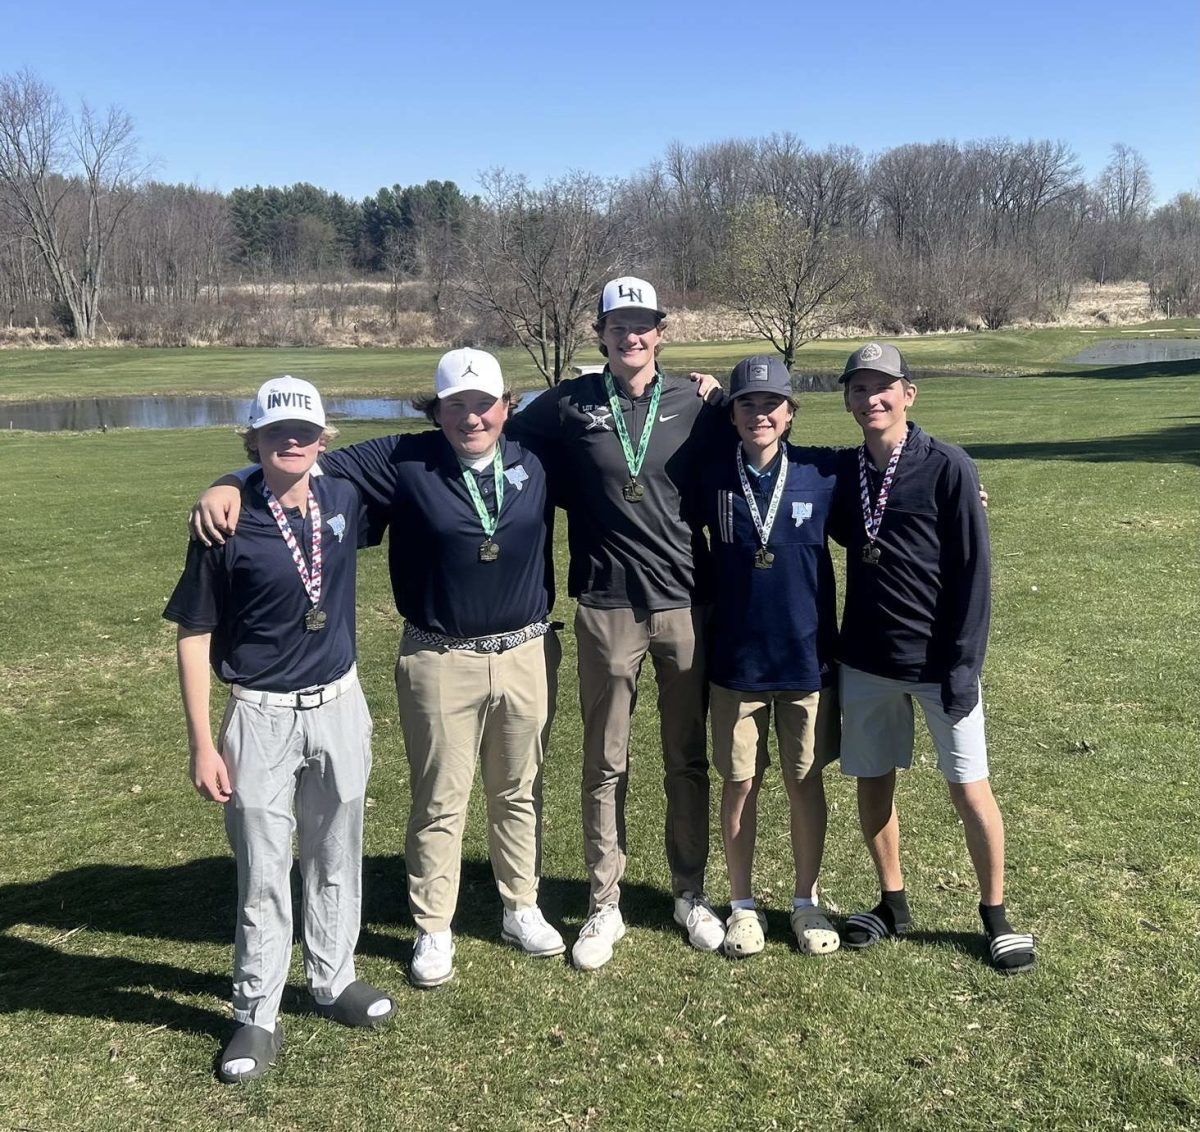 Members of the golf team, (from left to right) Samuel Gagie, Xander Gorham, Isaac Scarvarda, Griffin Moore and Aaron Teal, stand arm in arm after a tough victory in one of their tournaments. They all played their hardest and are happy to earn this win. 